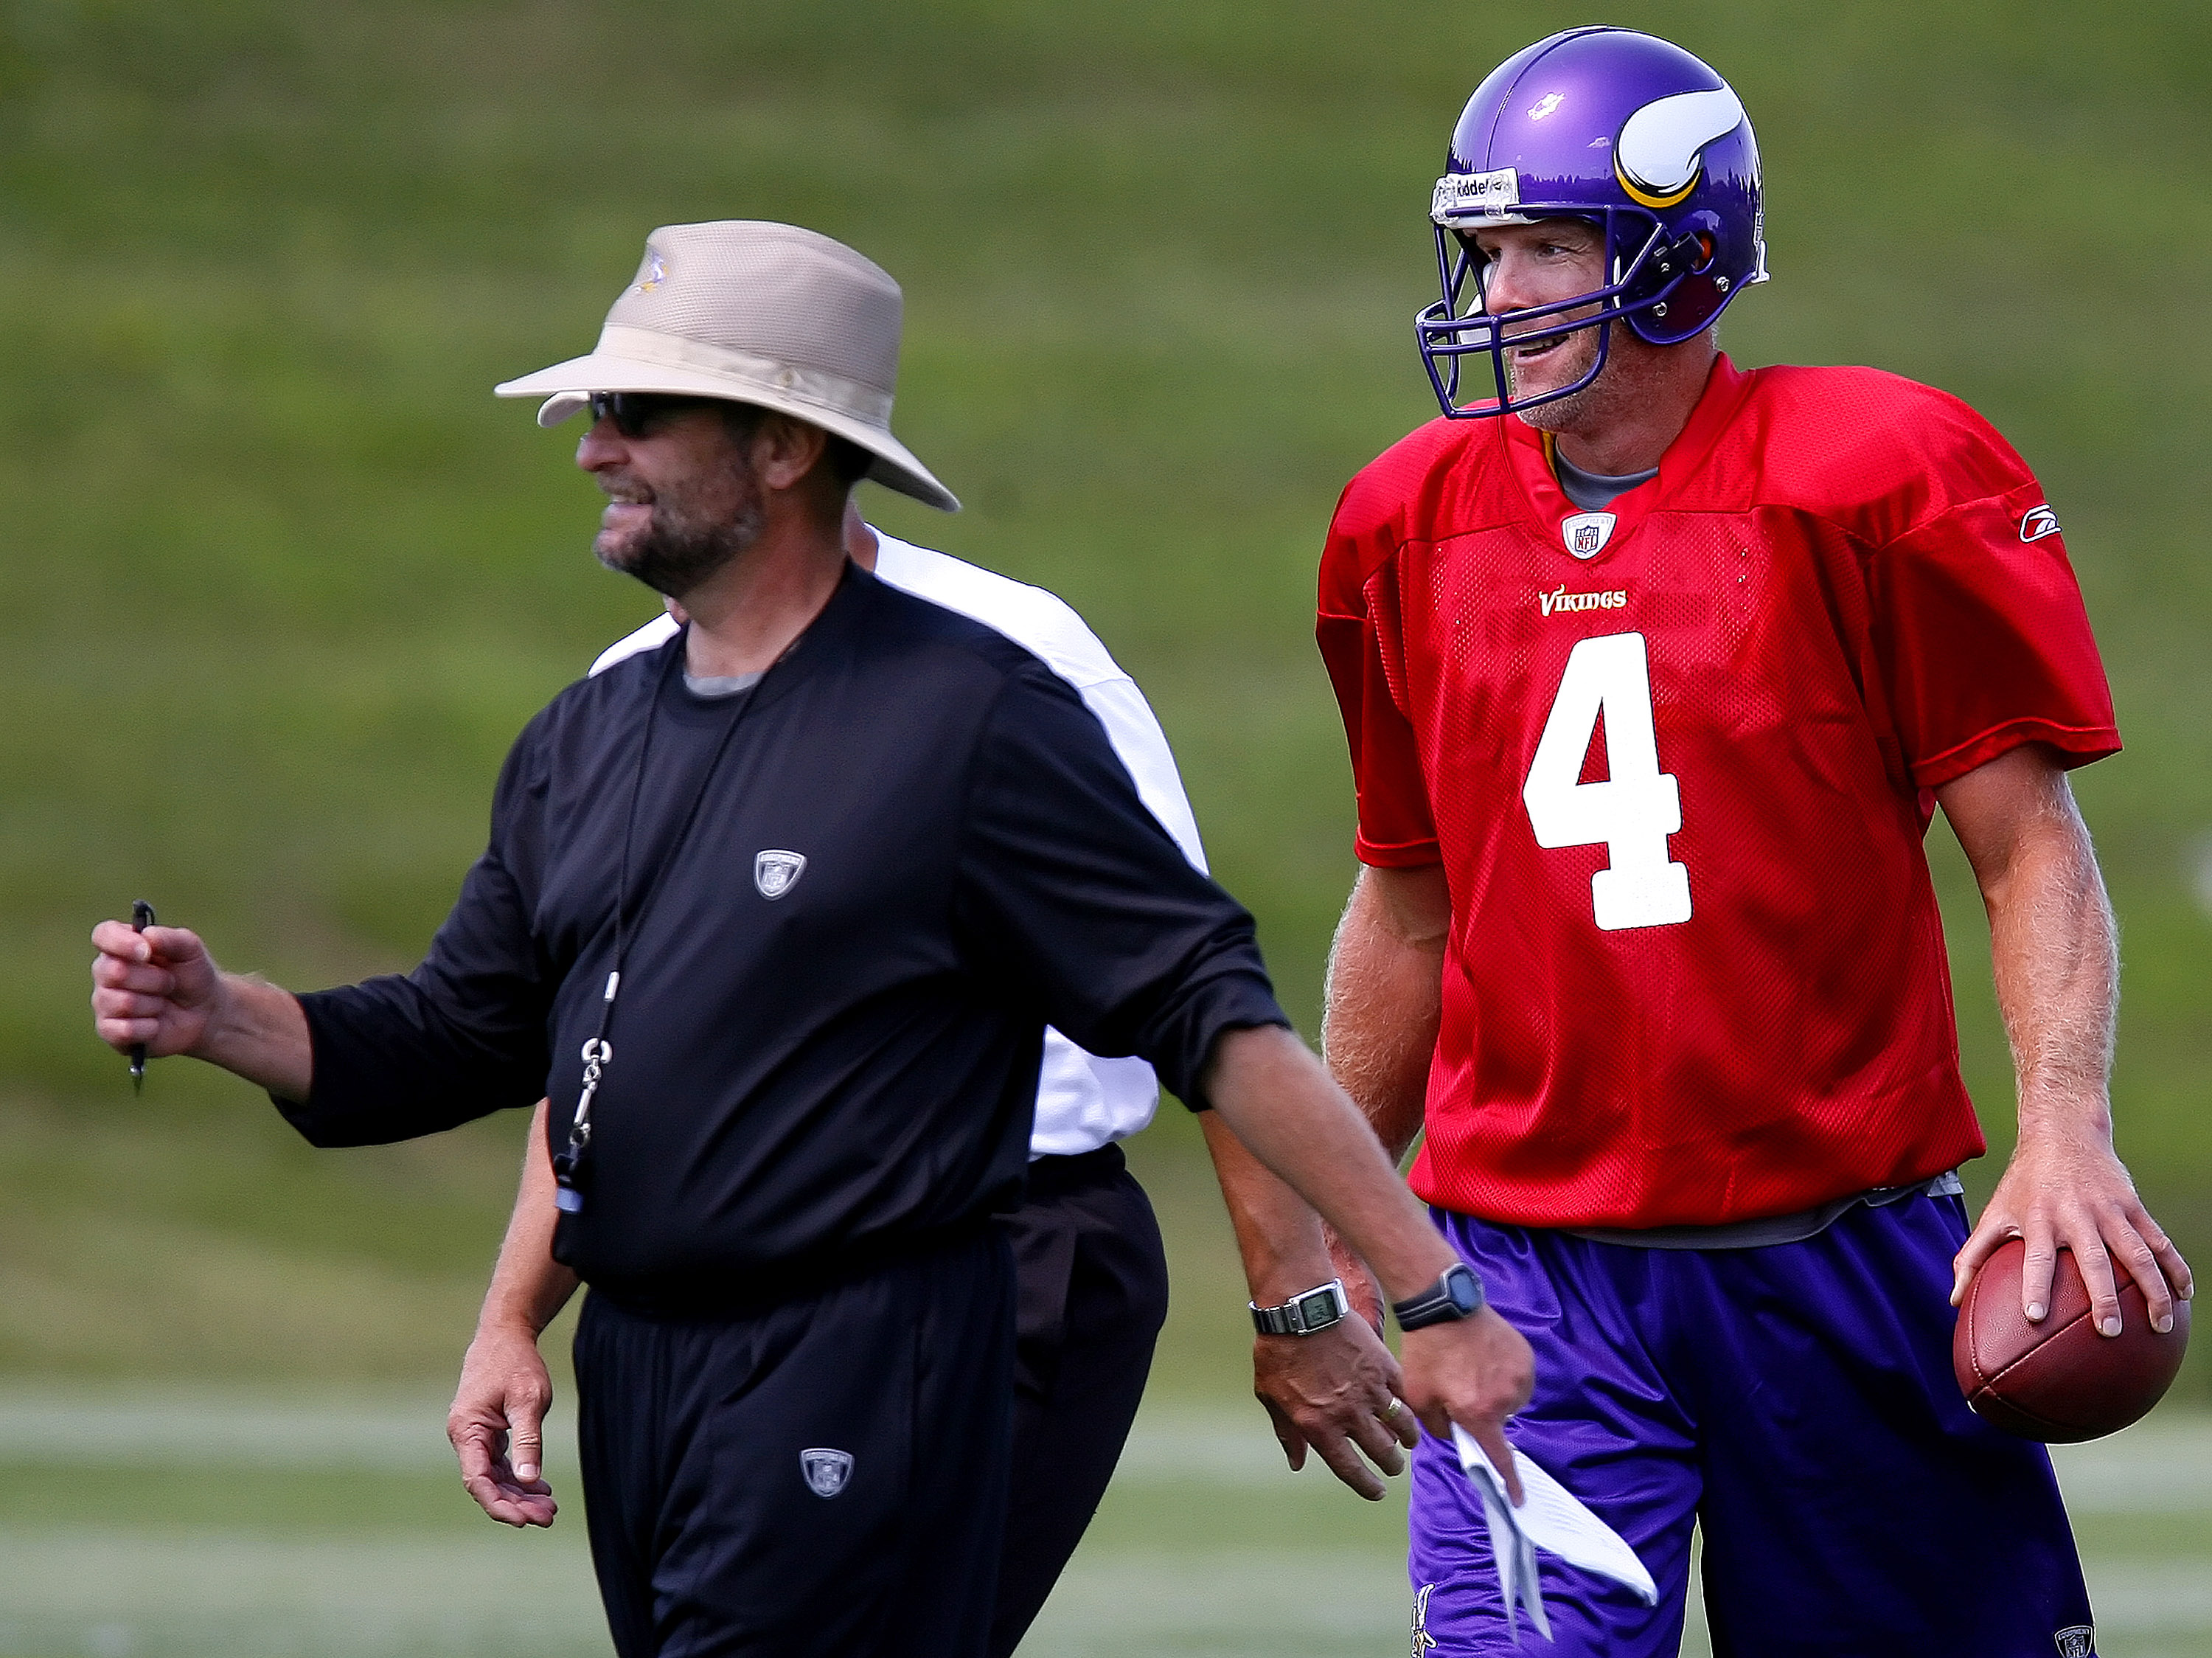 EDEN PRAIRIE, MN - AUGUST 18:  Minnesota Vikings Head Coach Brad Childress (L) walks with Brett Favre #4 after finishing  a passing drill during a Minnesota Vikings practice session on August 18, 2009 at Winter Park in Eden Prairie, Minnesota. Favre has r